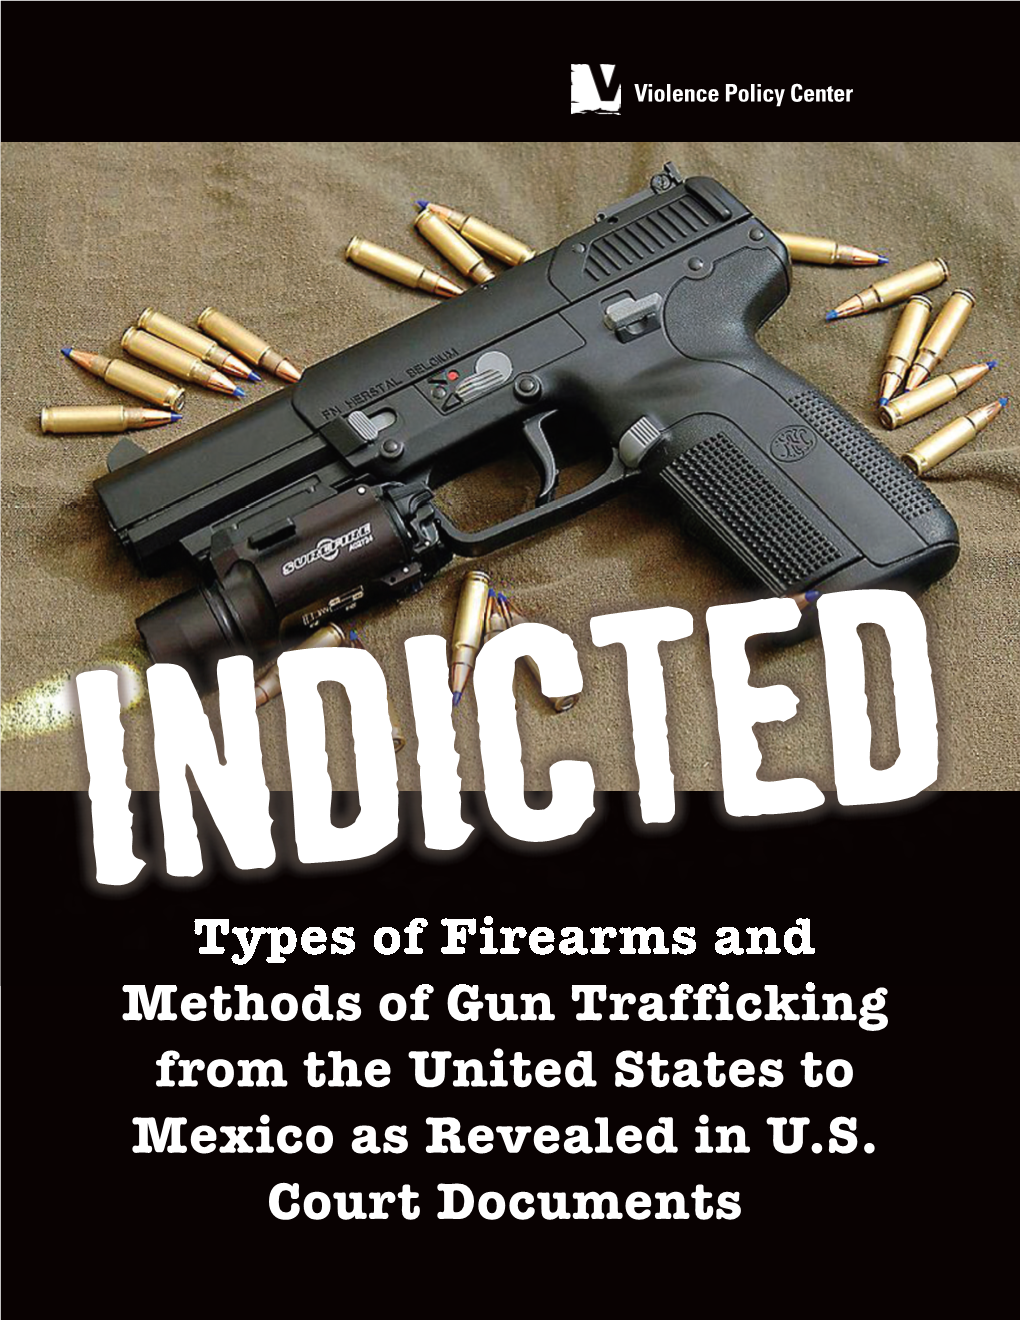 Types of Firearms and Methods of Gun Trafficking from the United States to Mexico As Revealed in U.S